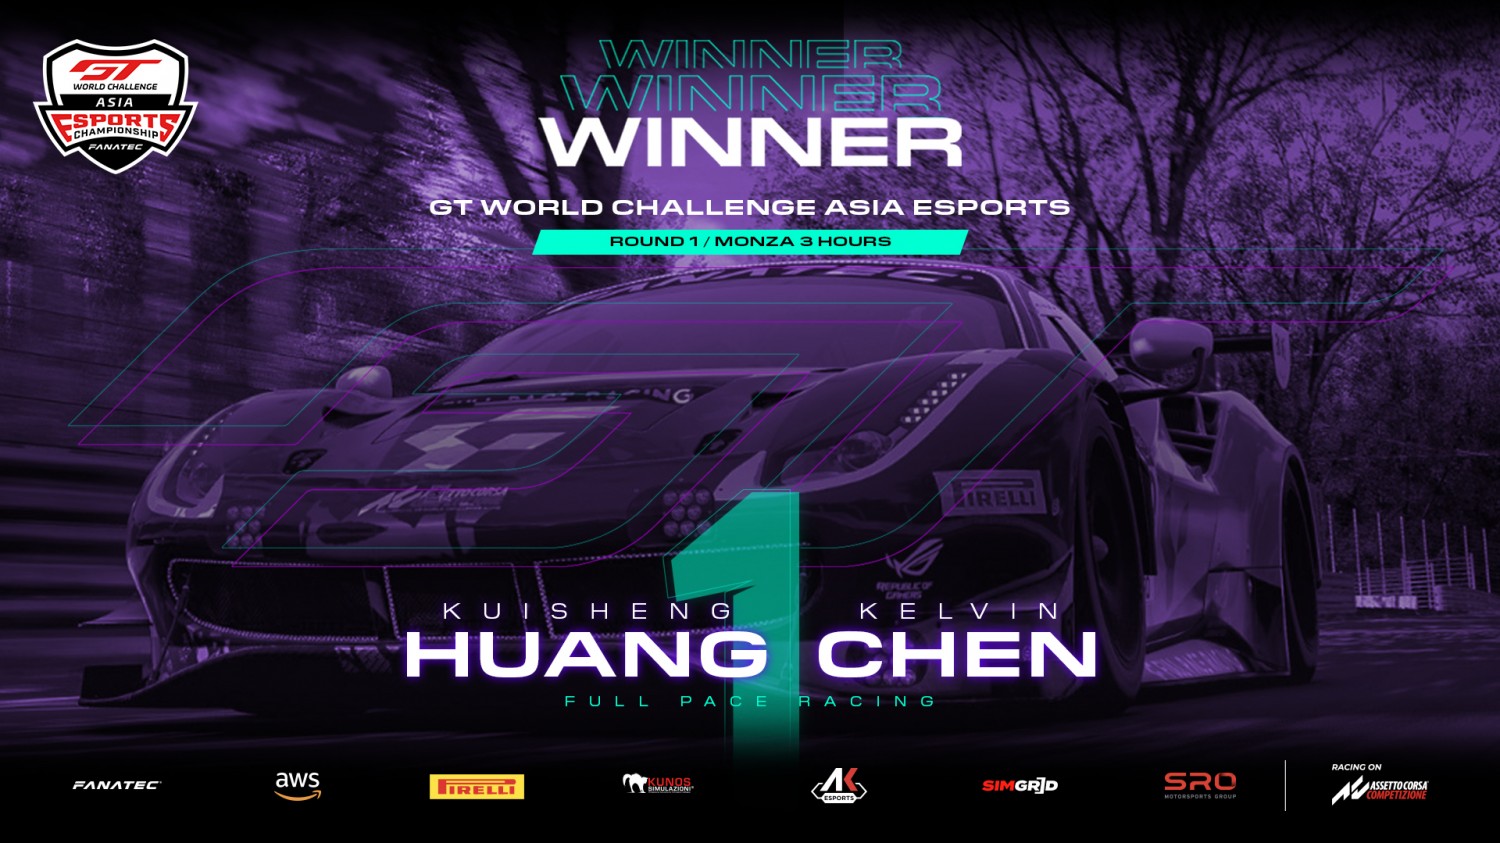 SRO E-sports - Full Pace’s Huang/Chen beat JMX Phantom to Endurance Series victory in Monza 3 Hours thriller